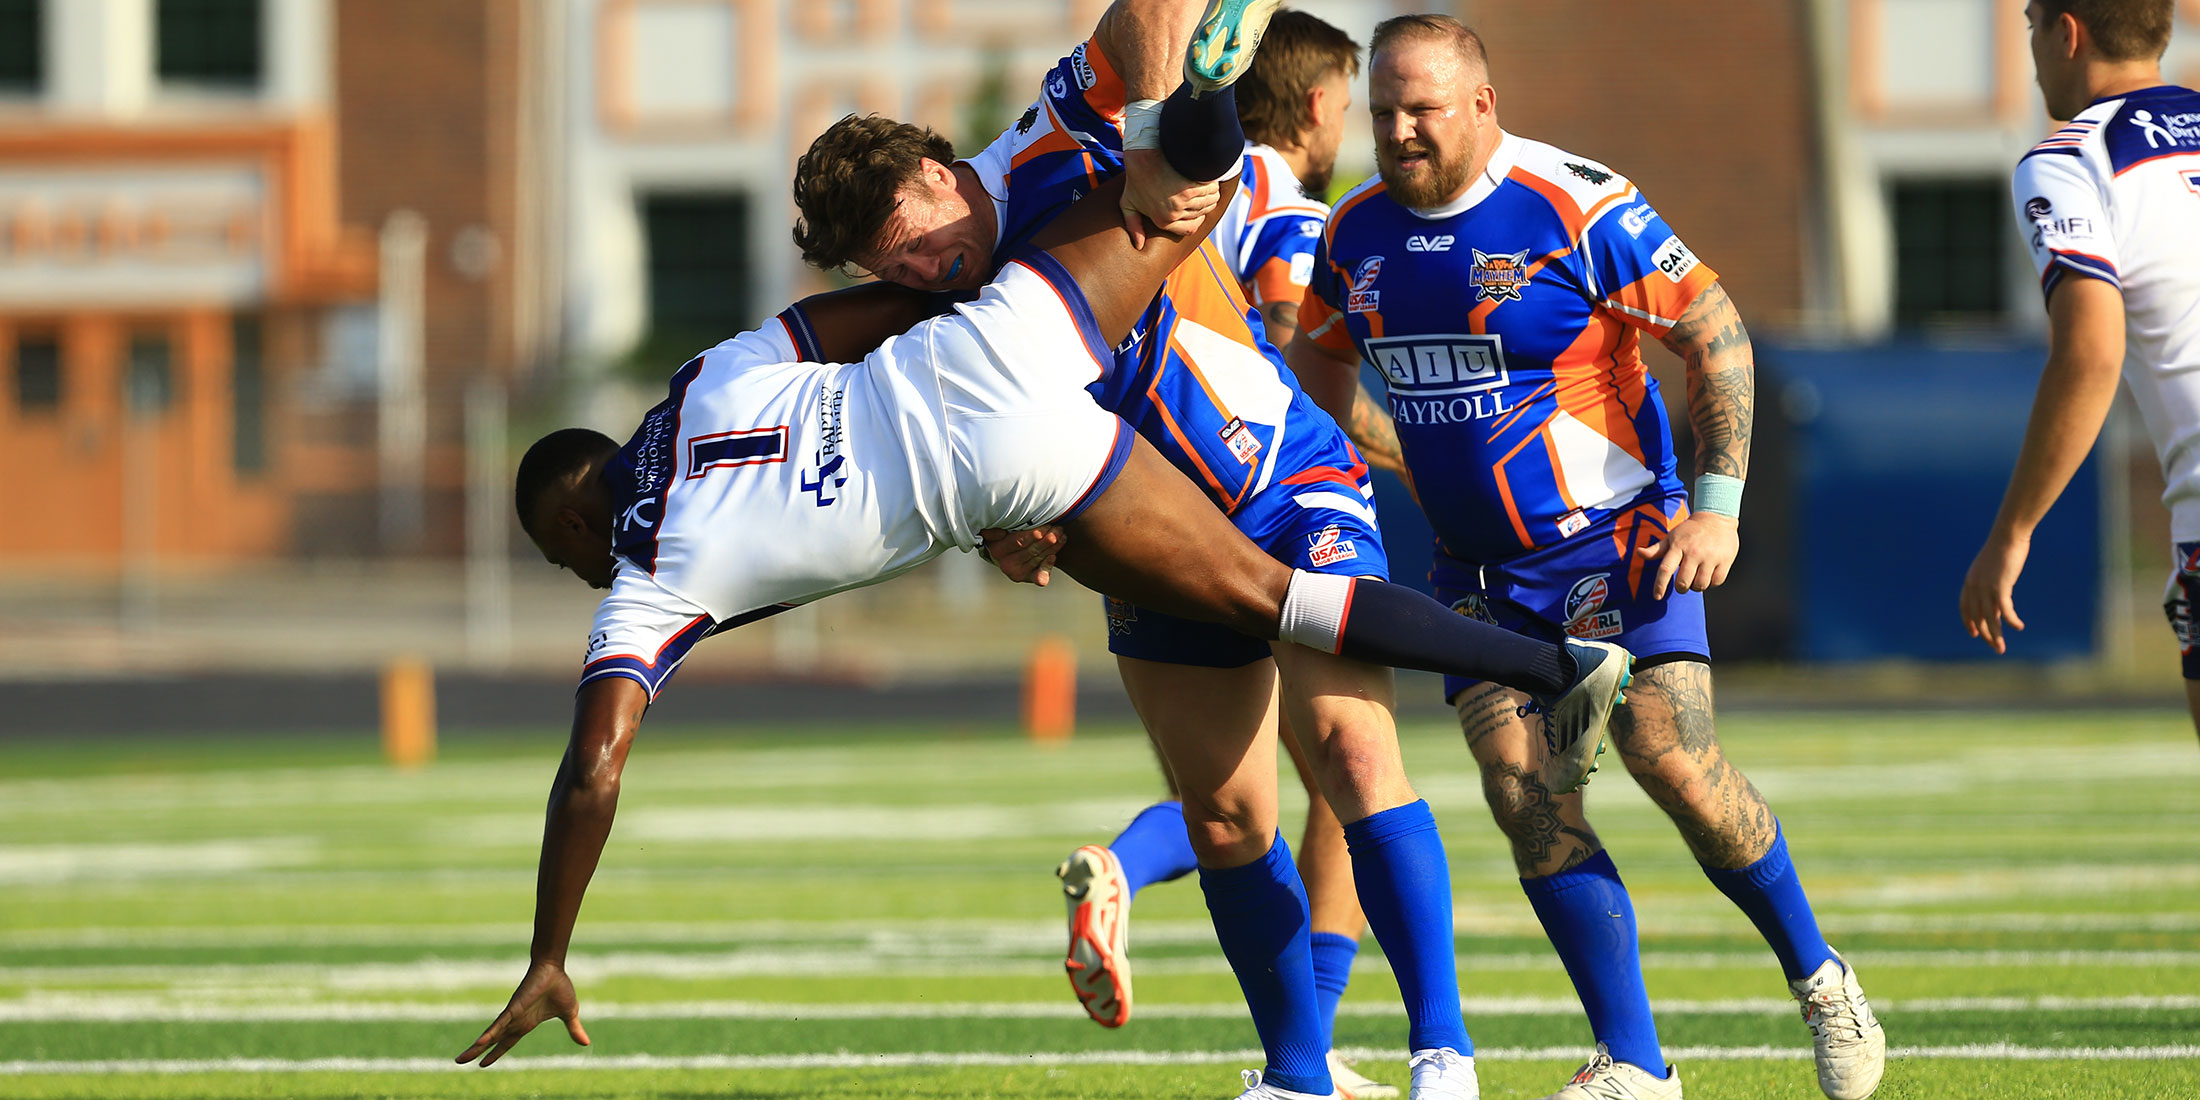 rugby player getting tackled